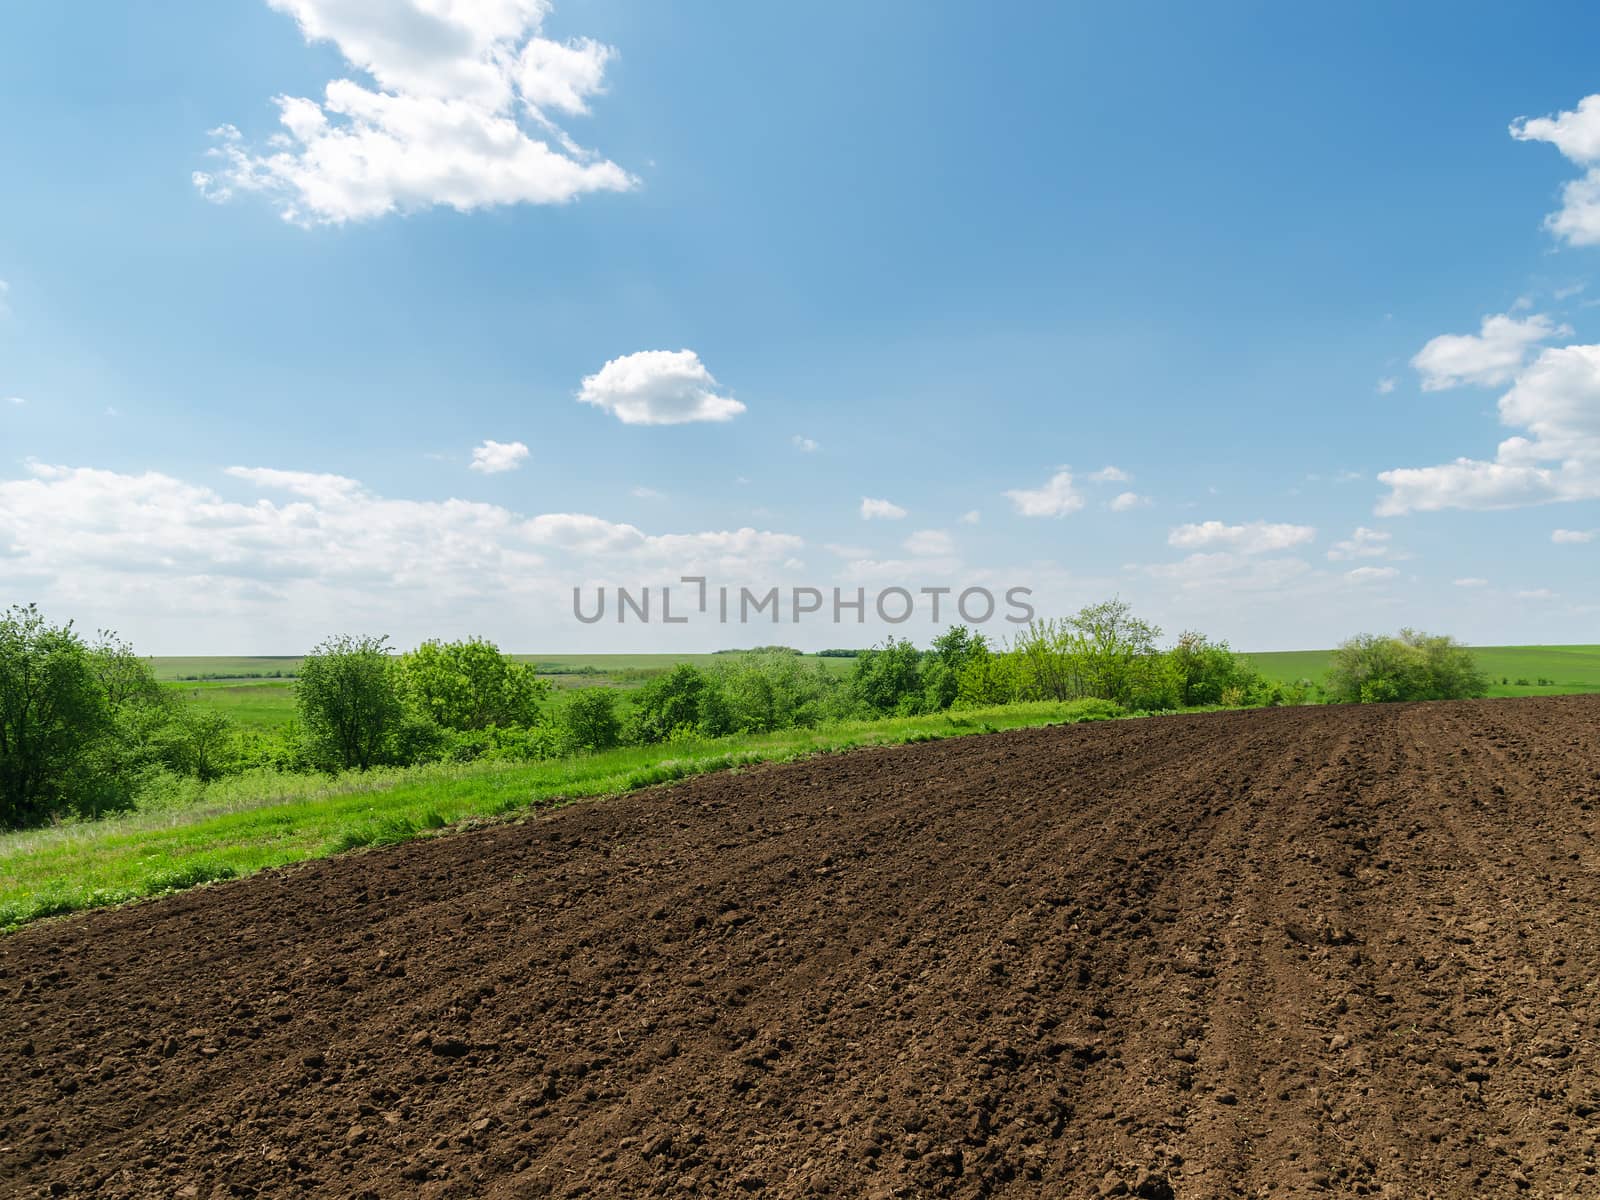 black plowed field and blue sky with clouds by mycola